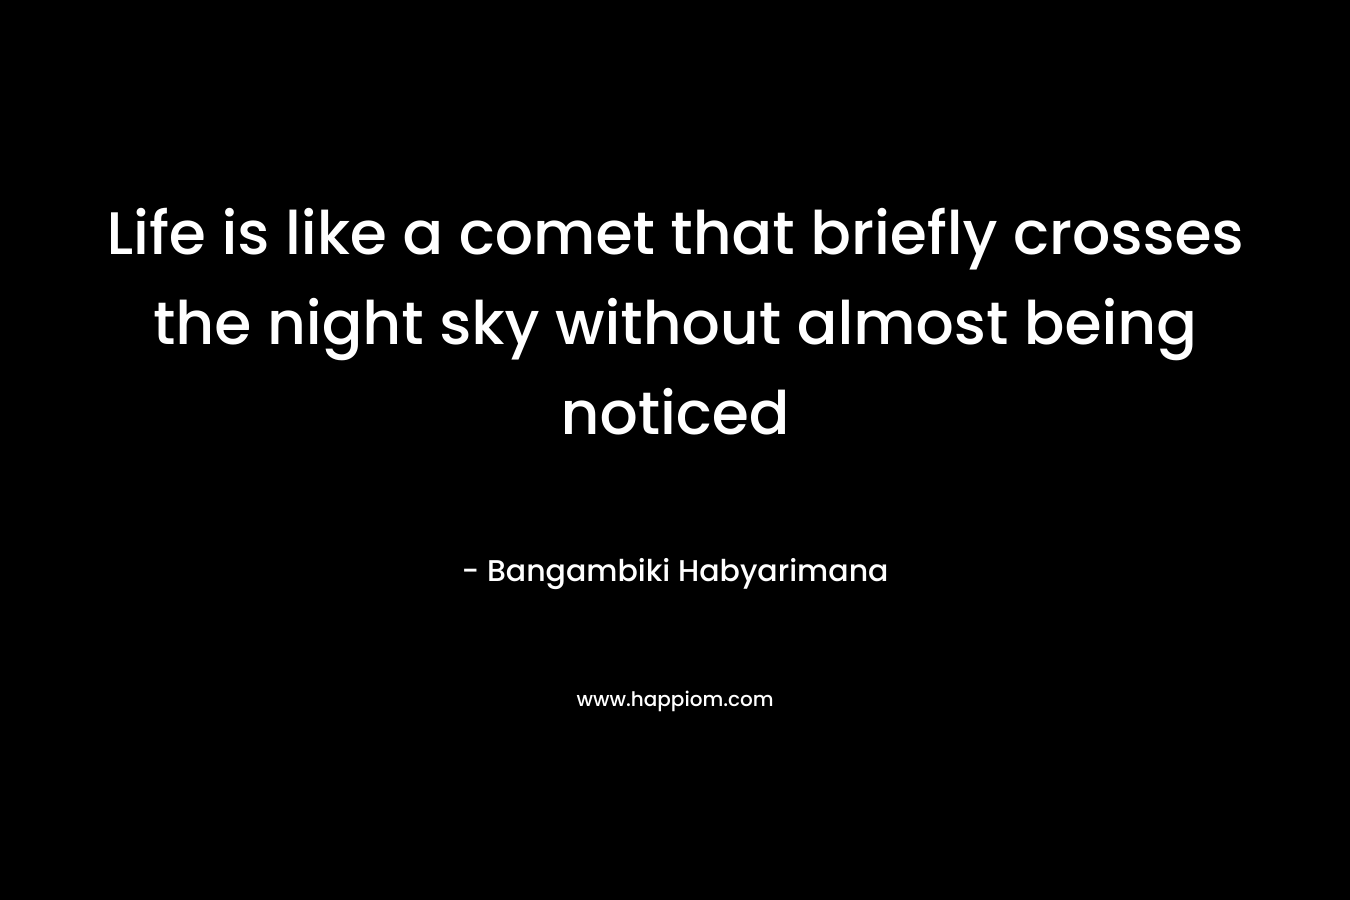 Life is like a comet that briefly crosses the night sky without almost being noticed – Bangambiki Habyarimana